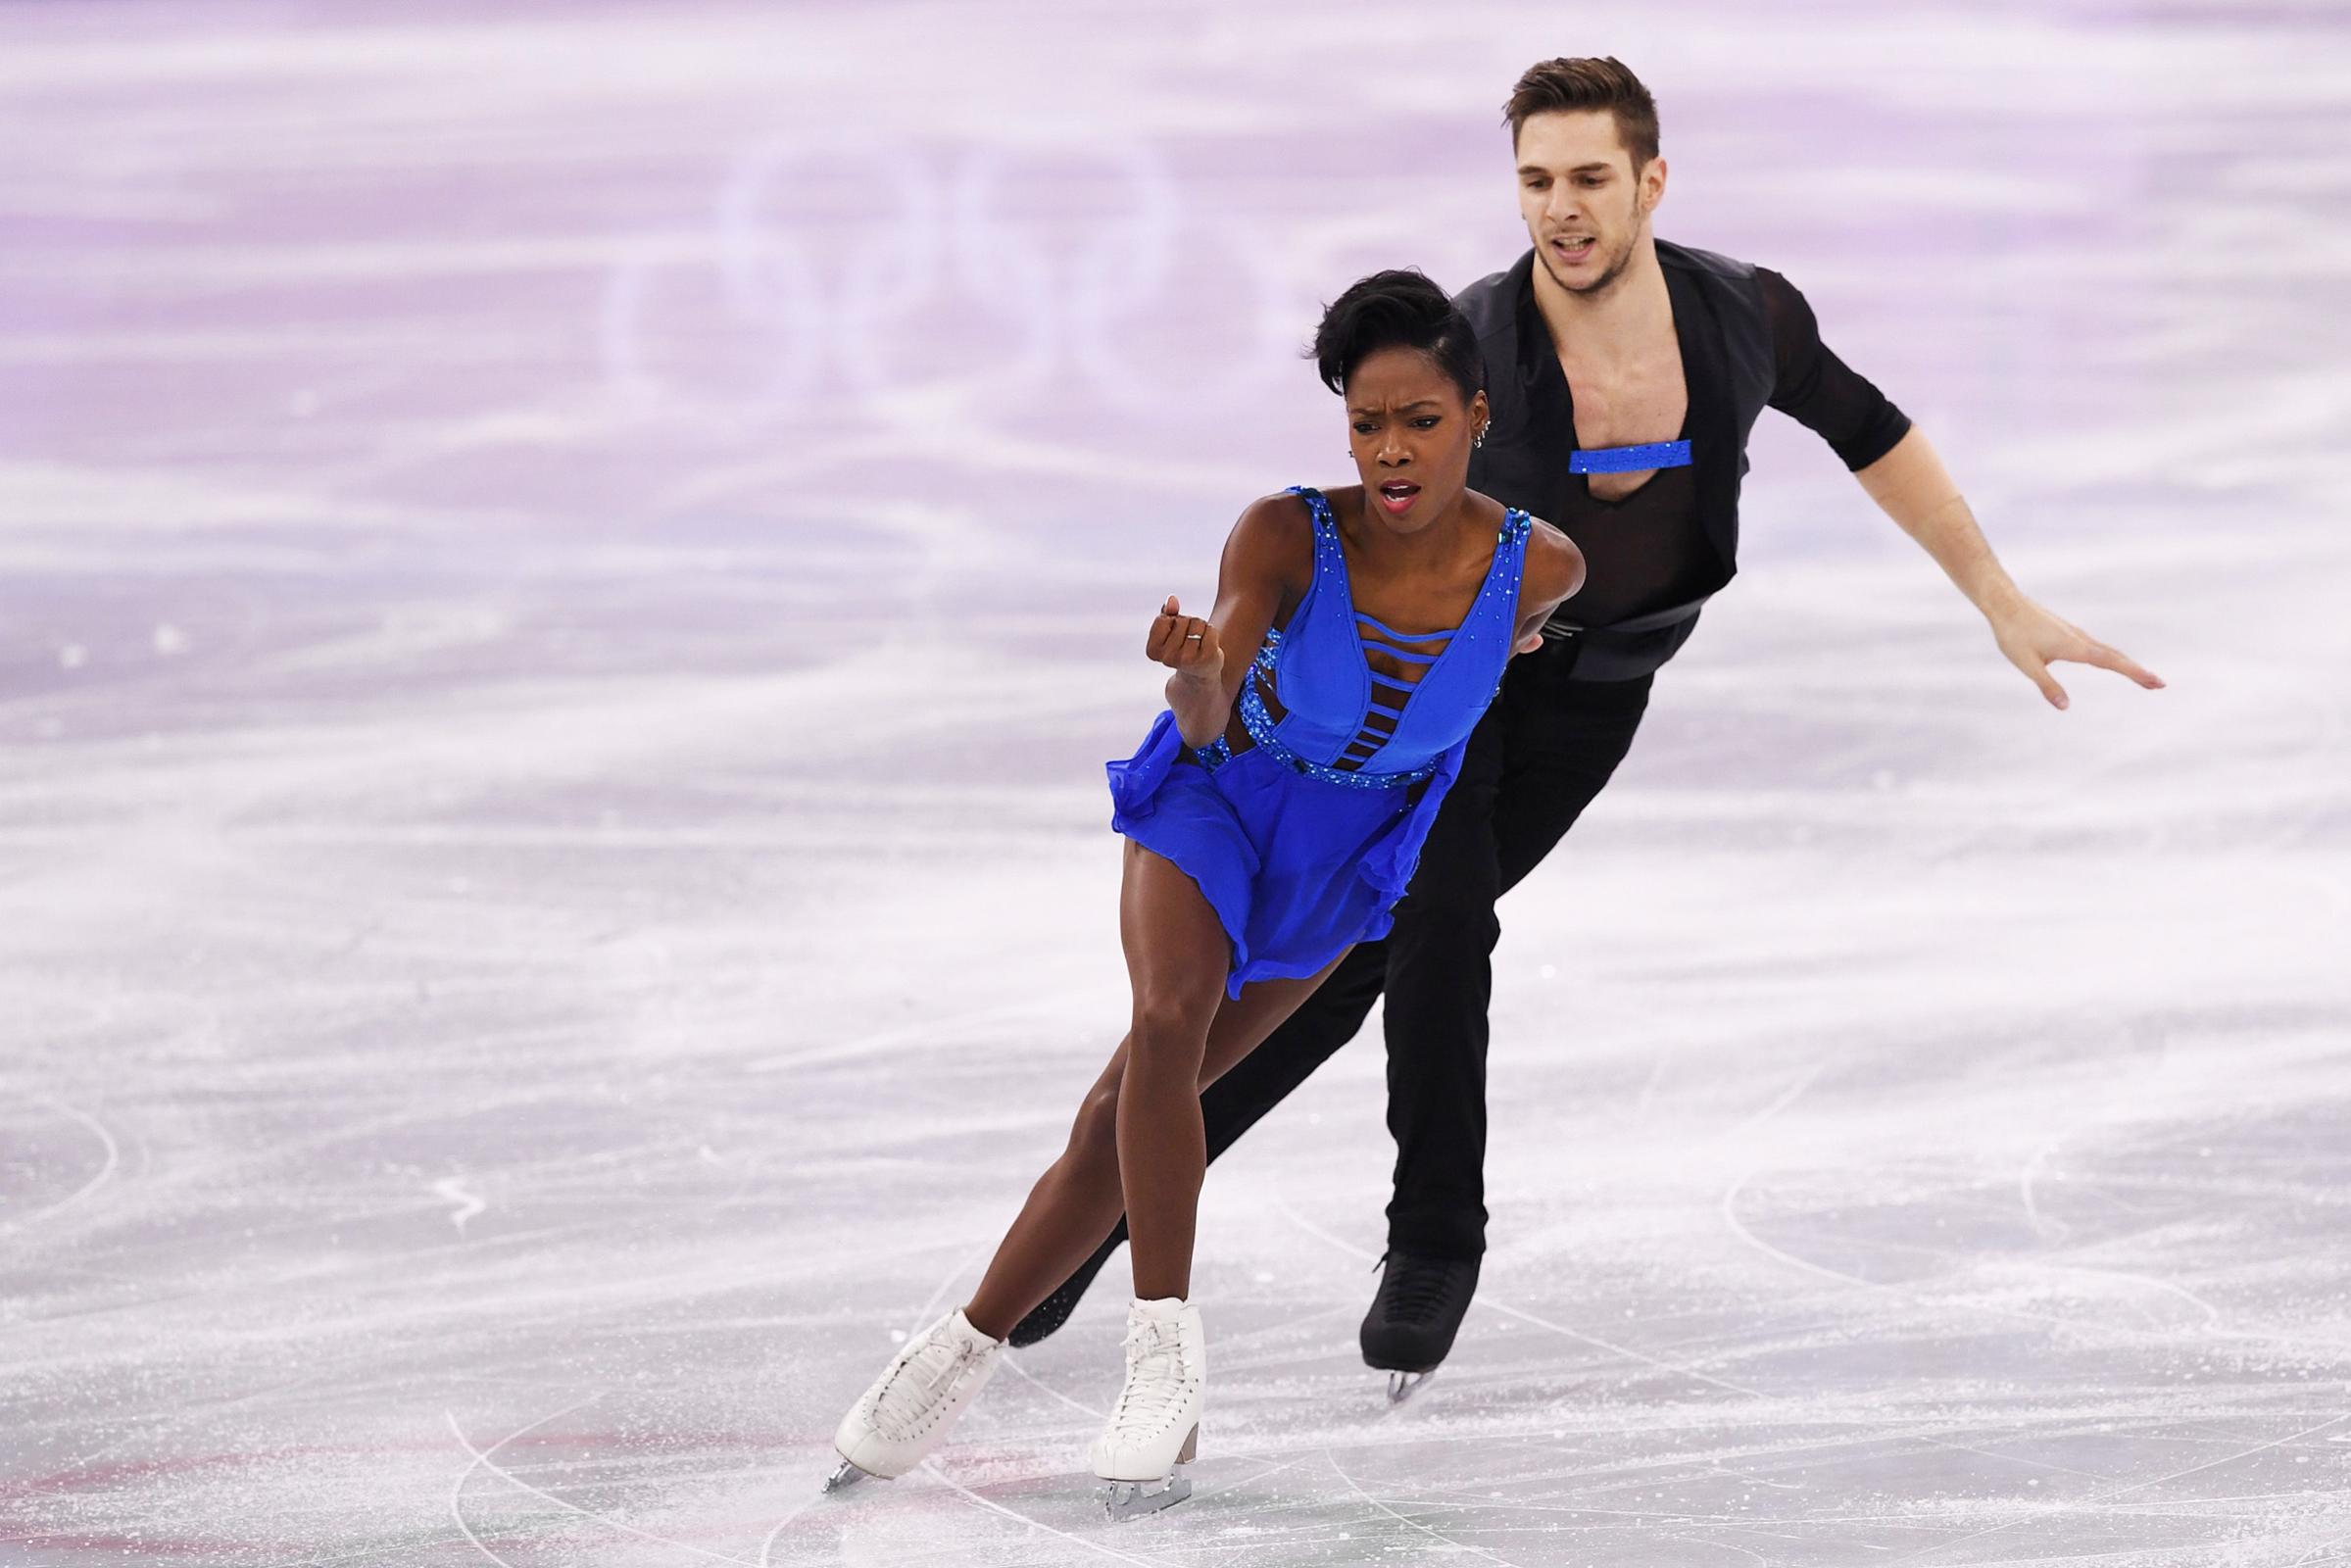 France's Vanessa James and Morgan Cipres compete in the pair skating short program of the figure skating event during the Pyeongchang 2018 Winter Olympic Games at the Gangneung Ice Arena in Gangneung on Feb. 14, 2018.